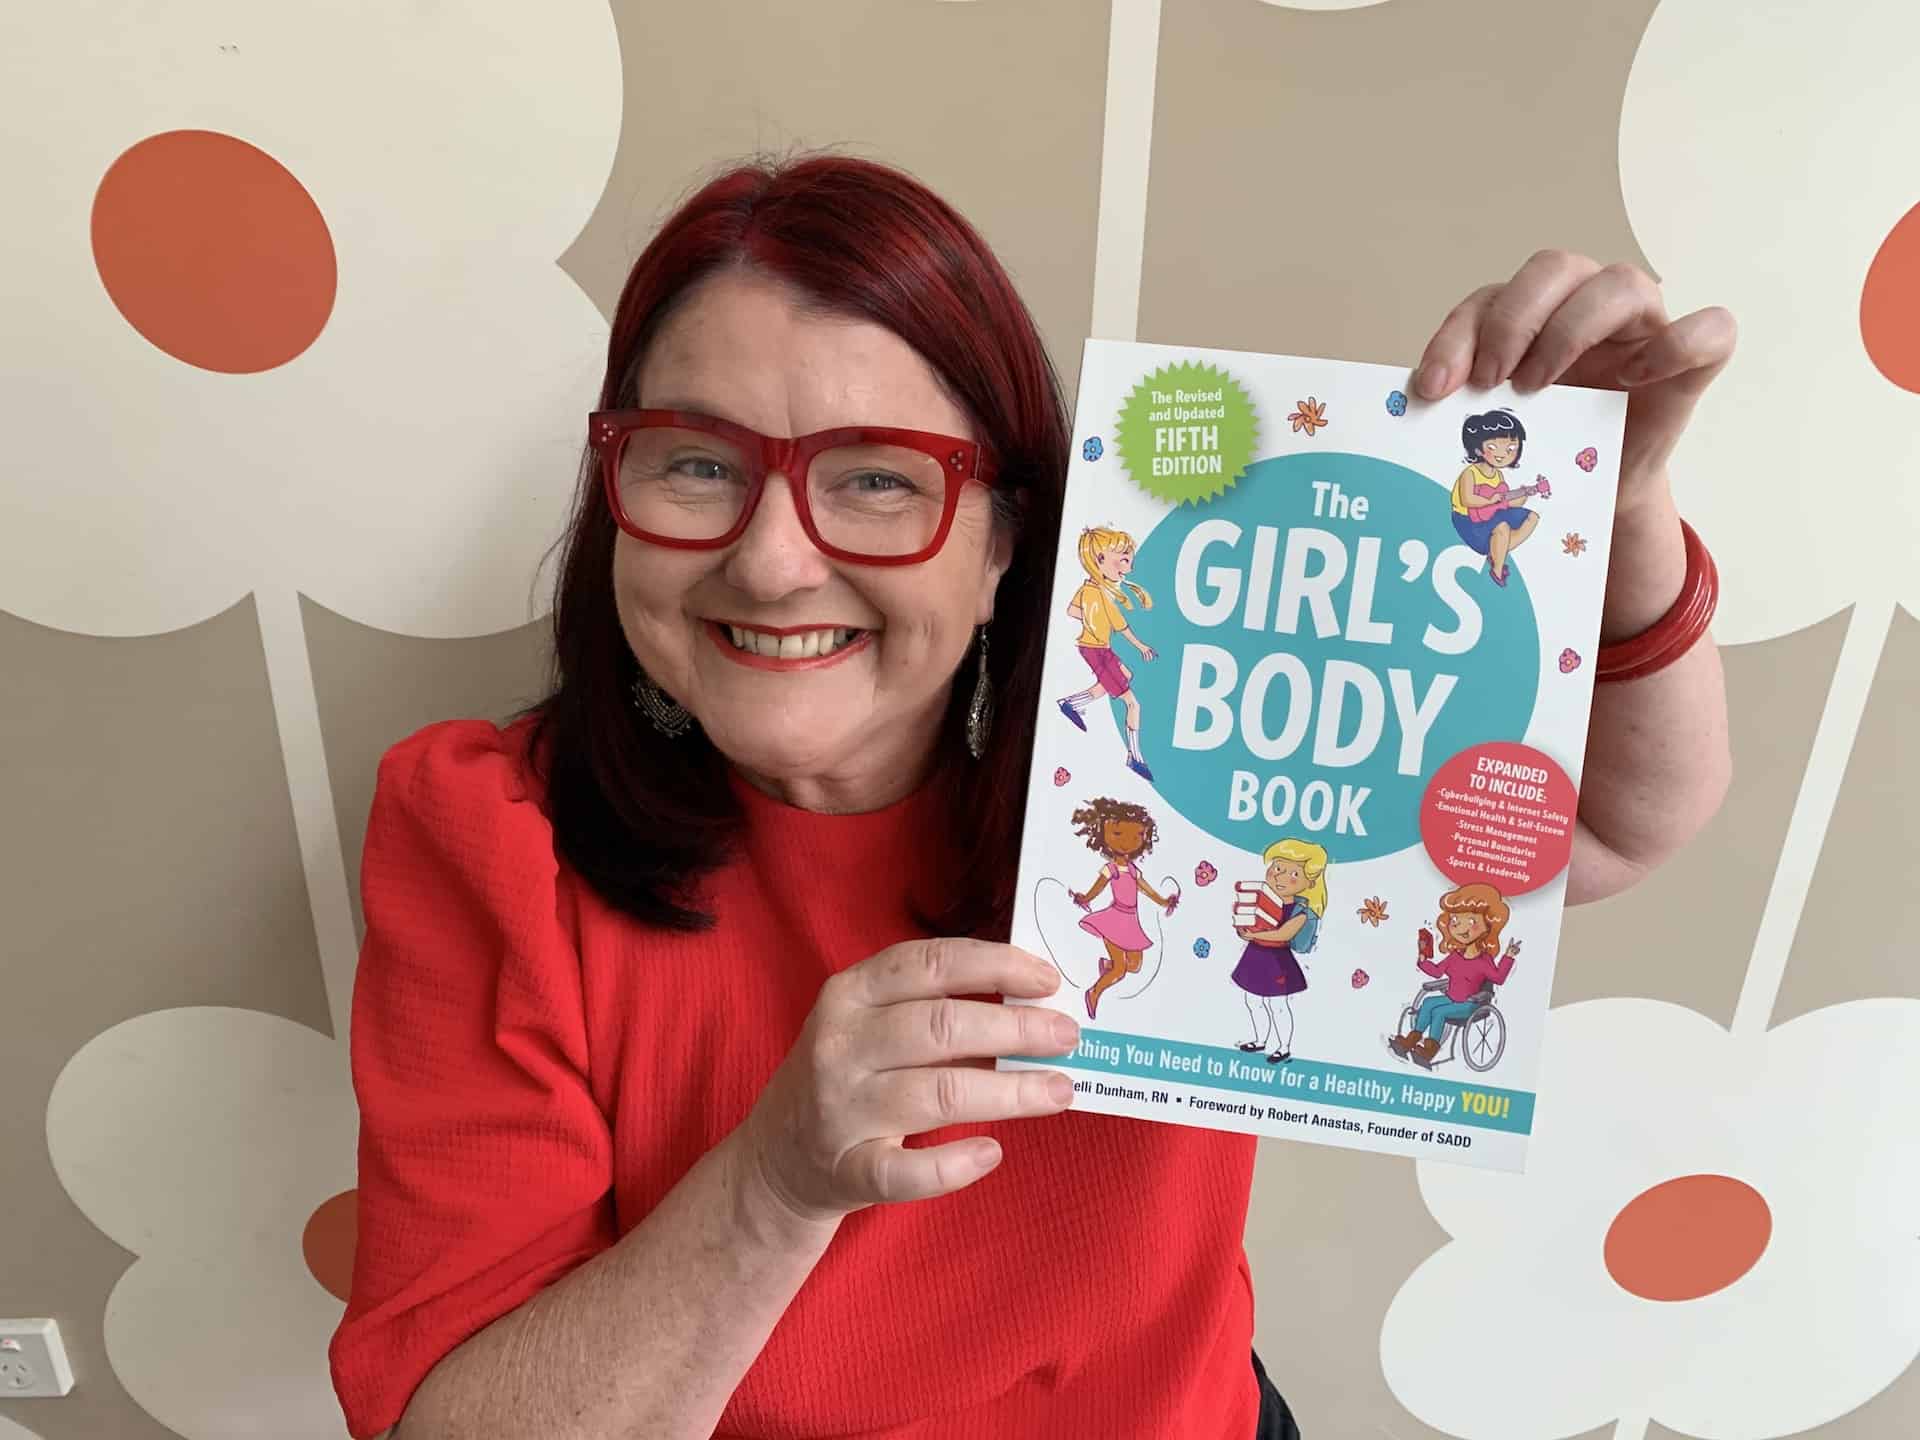 The Girl's Body Book - Book review by Rowena Thomas | 'Amazing Me'